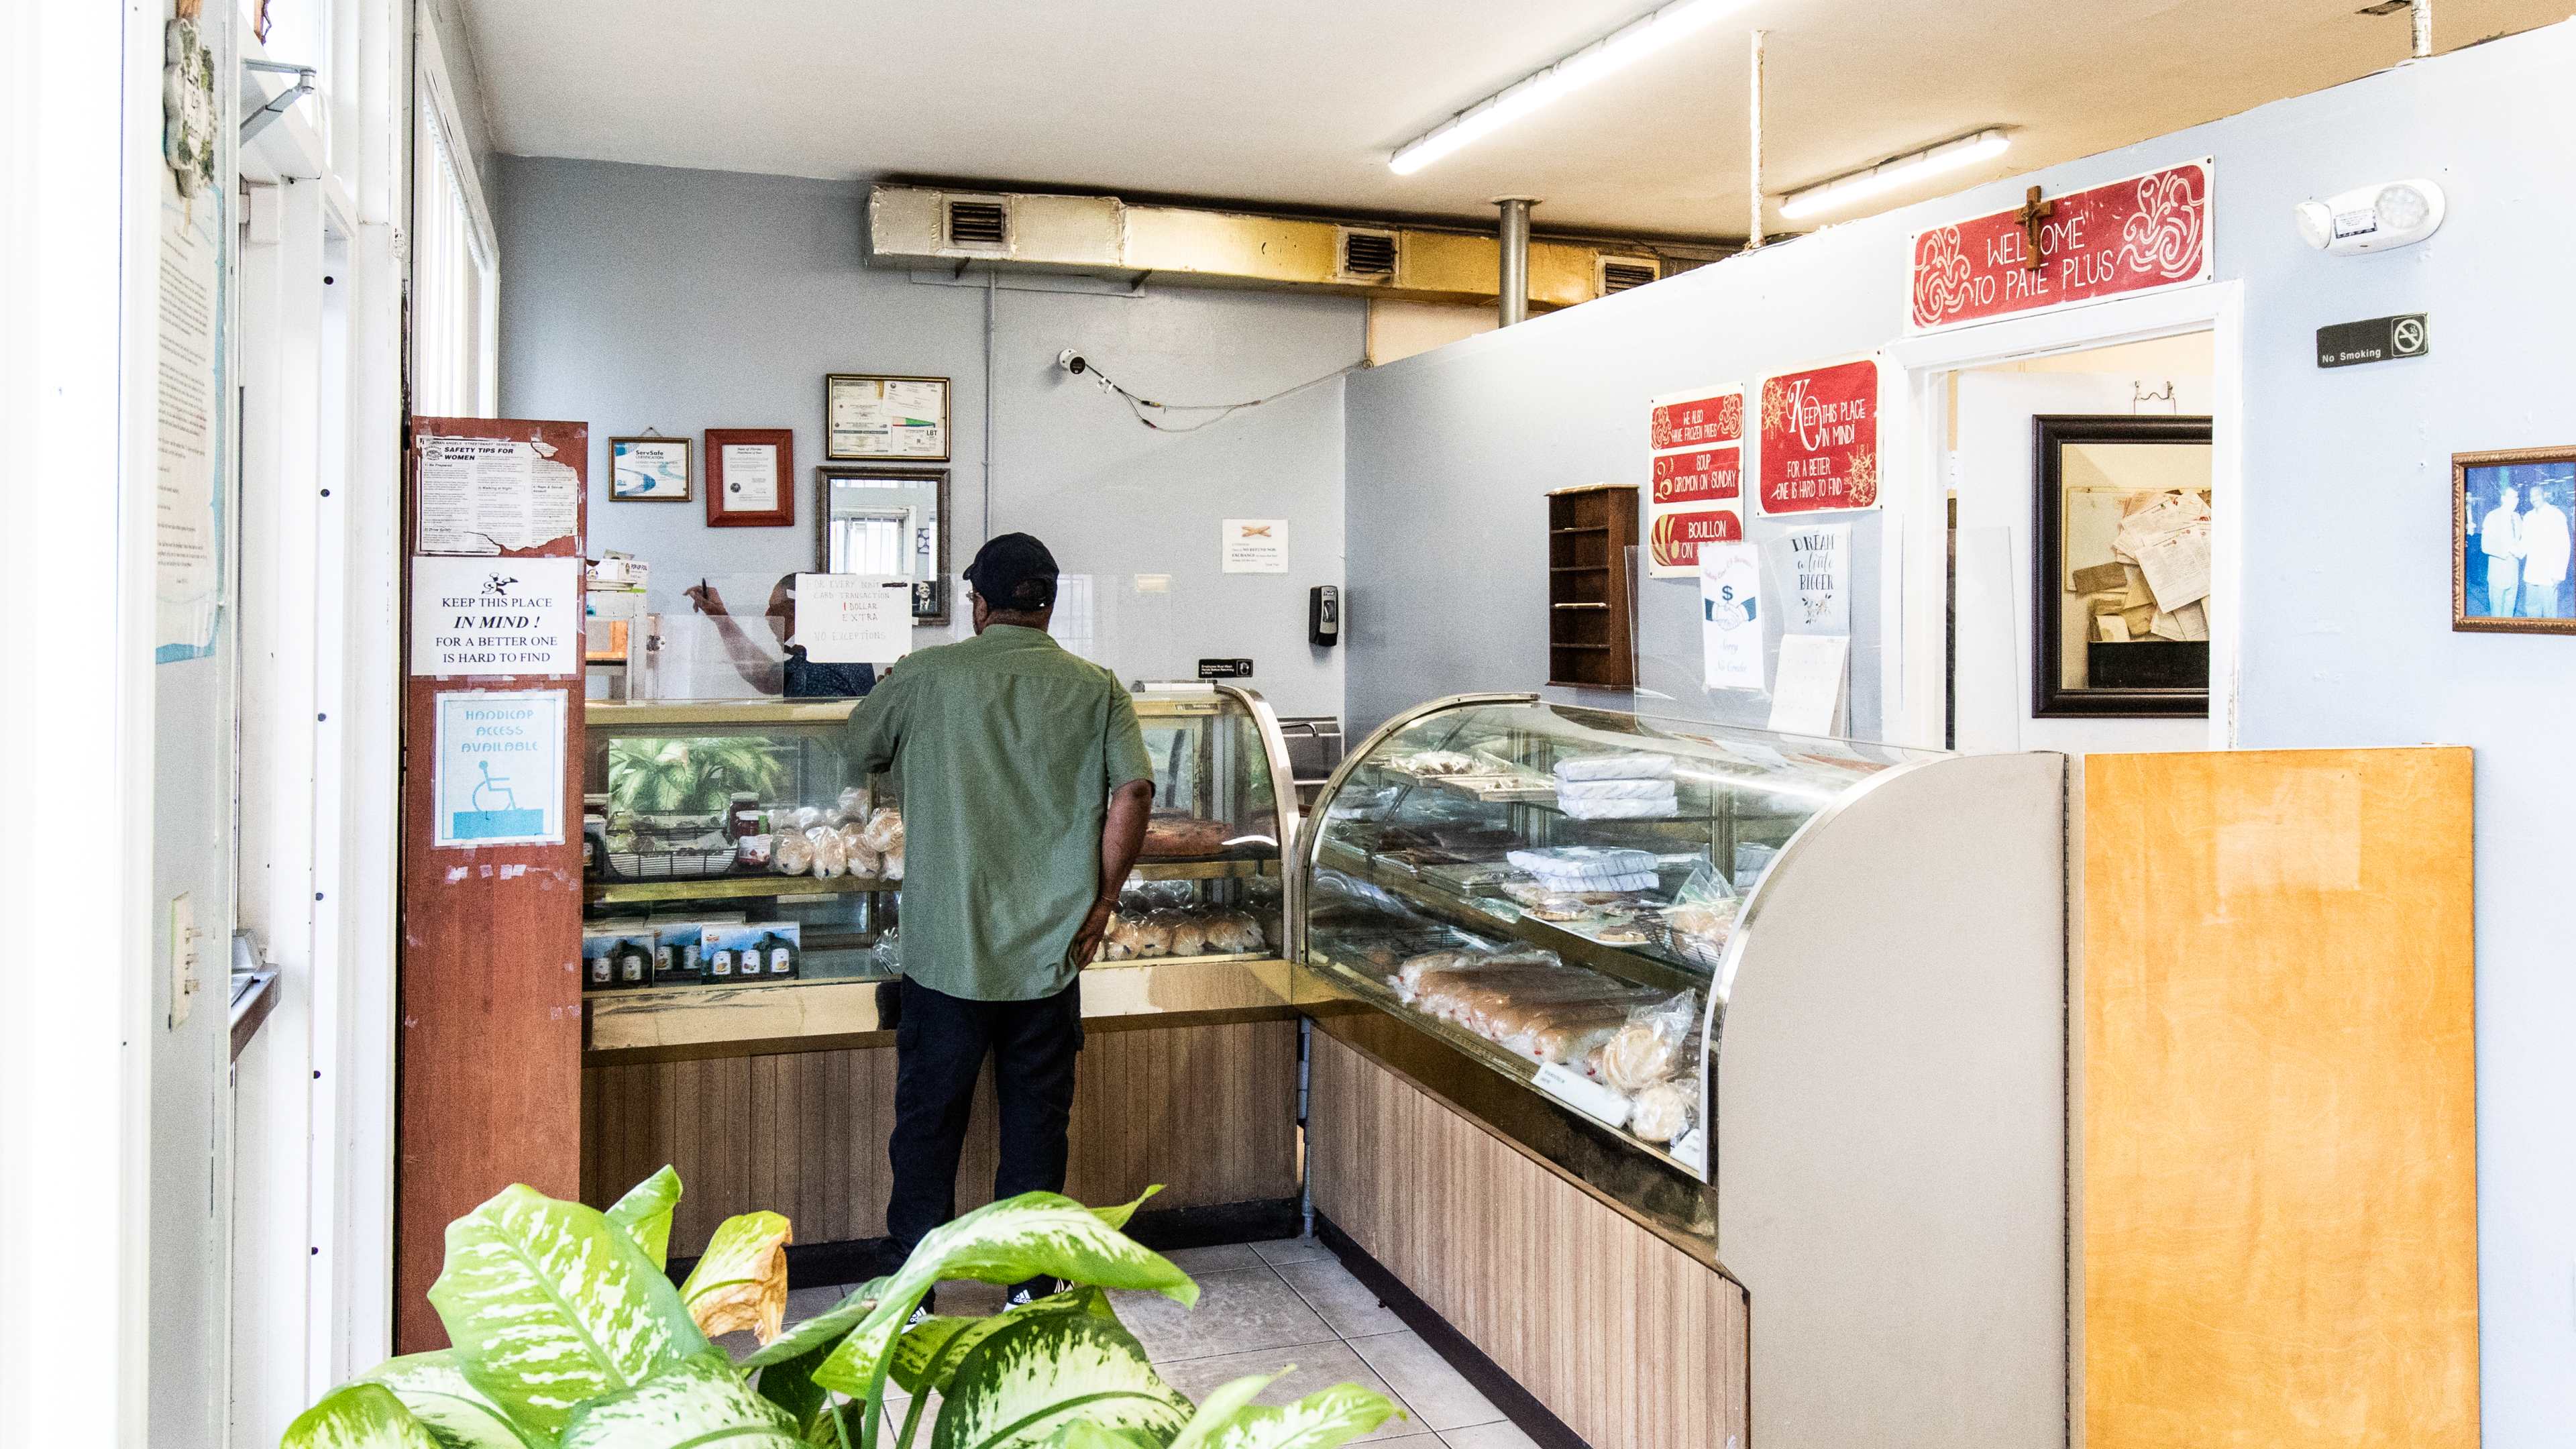 A man orders at a counter inside a small bakery.